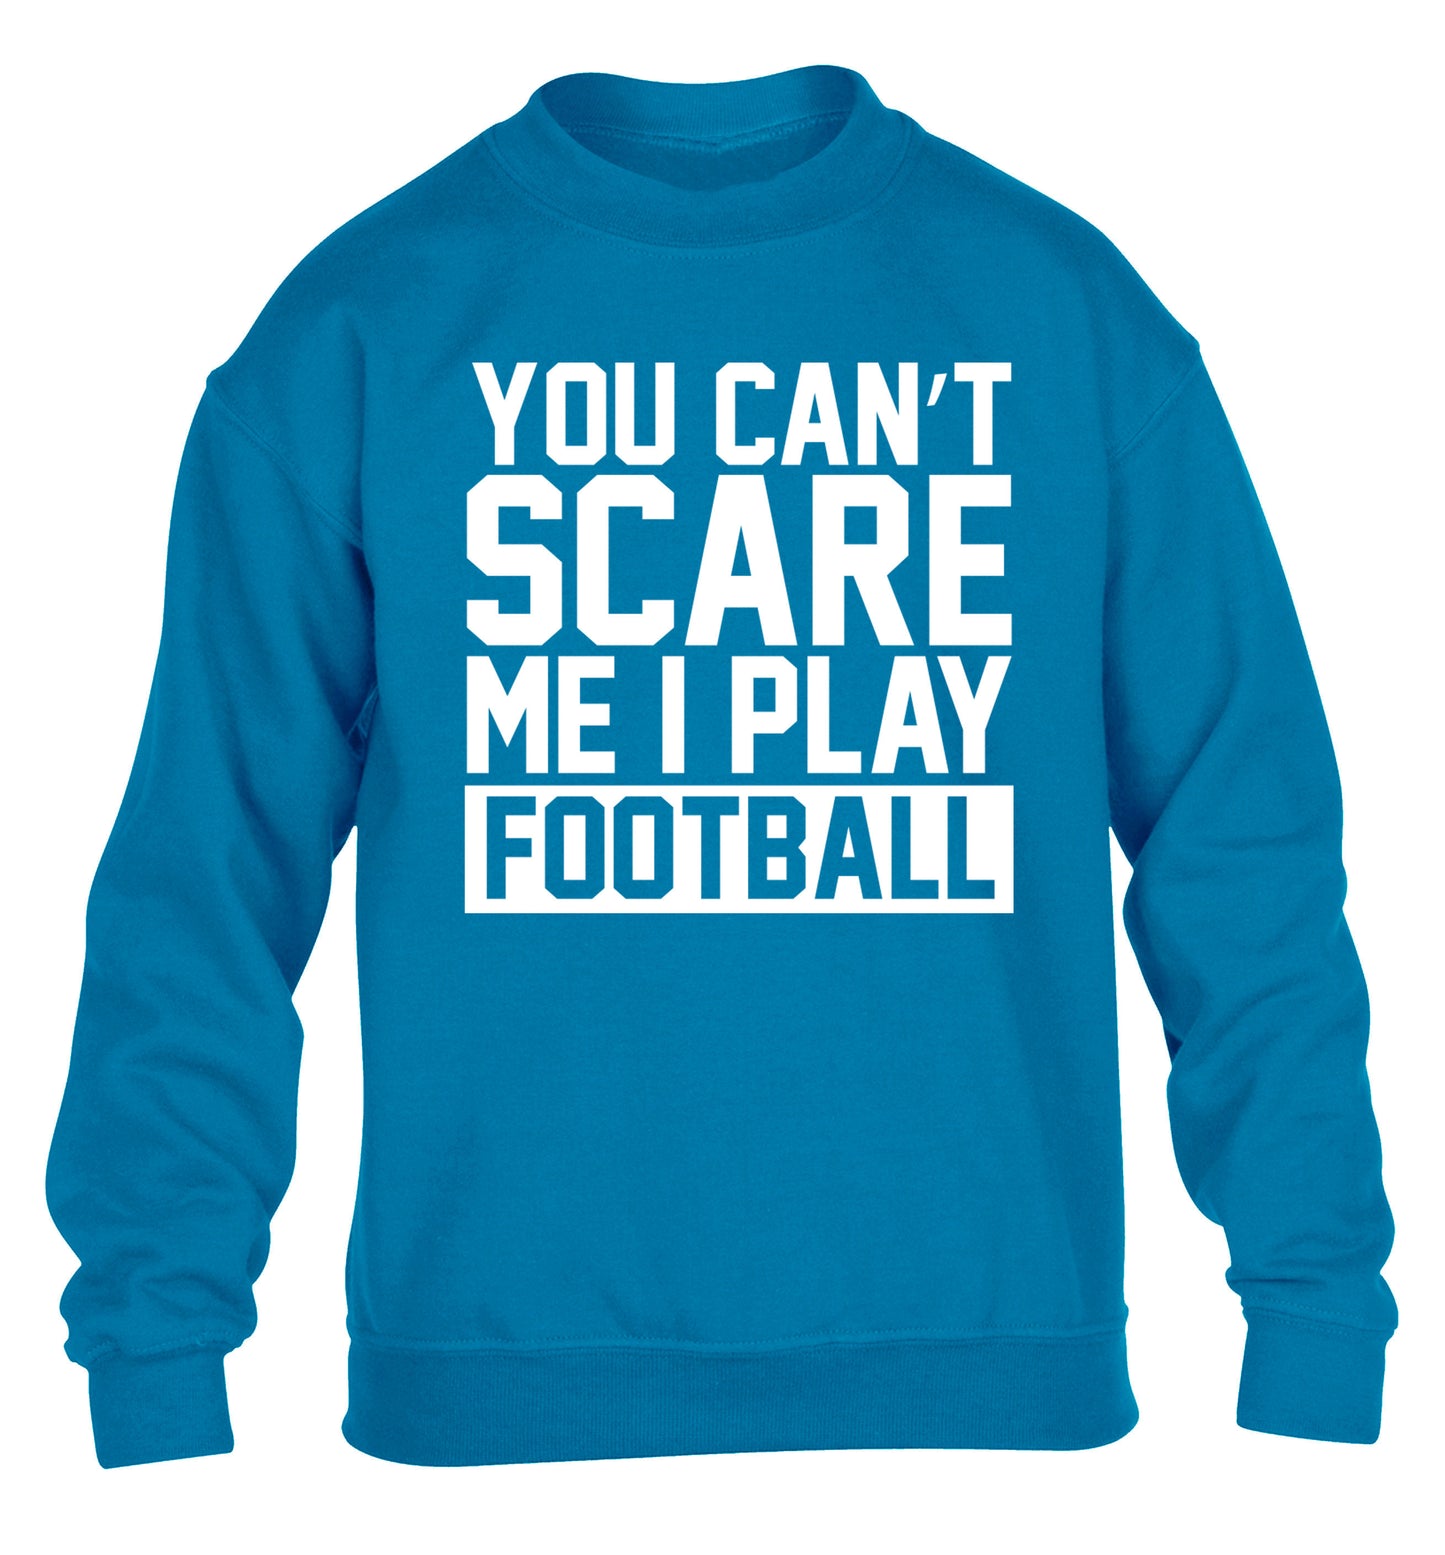 You can't scare me I play football children's blue sweater 12-14 Years